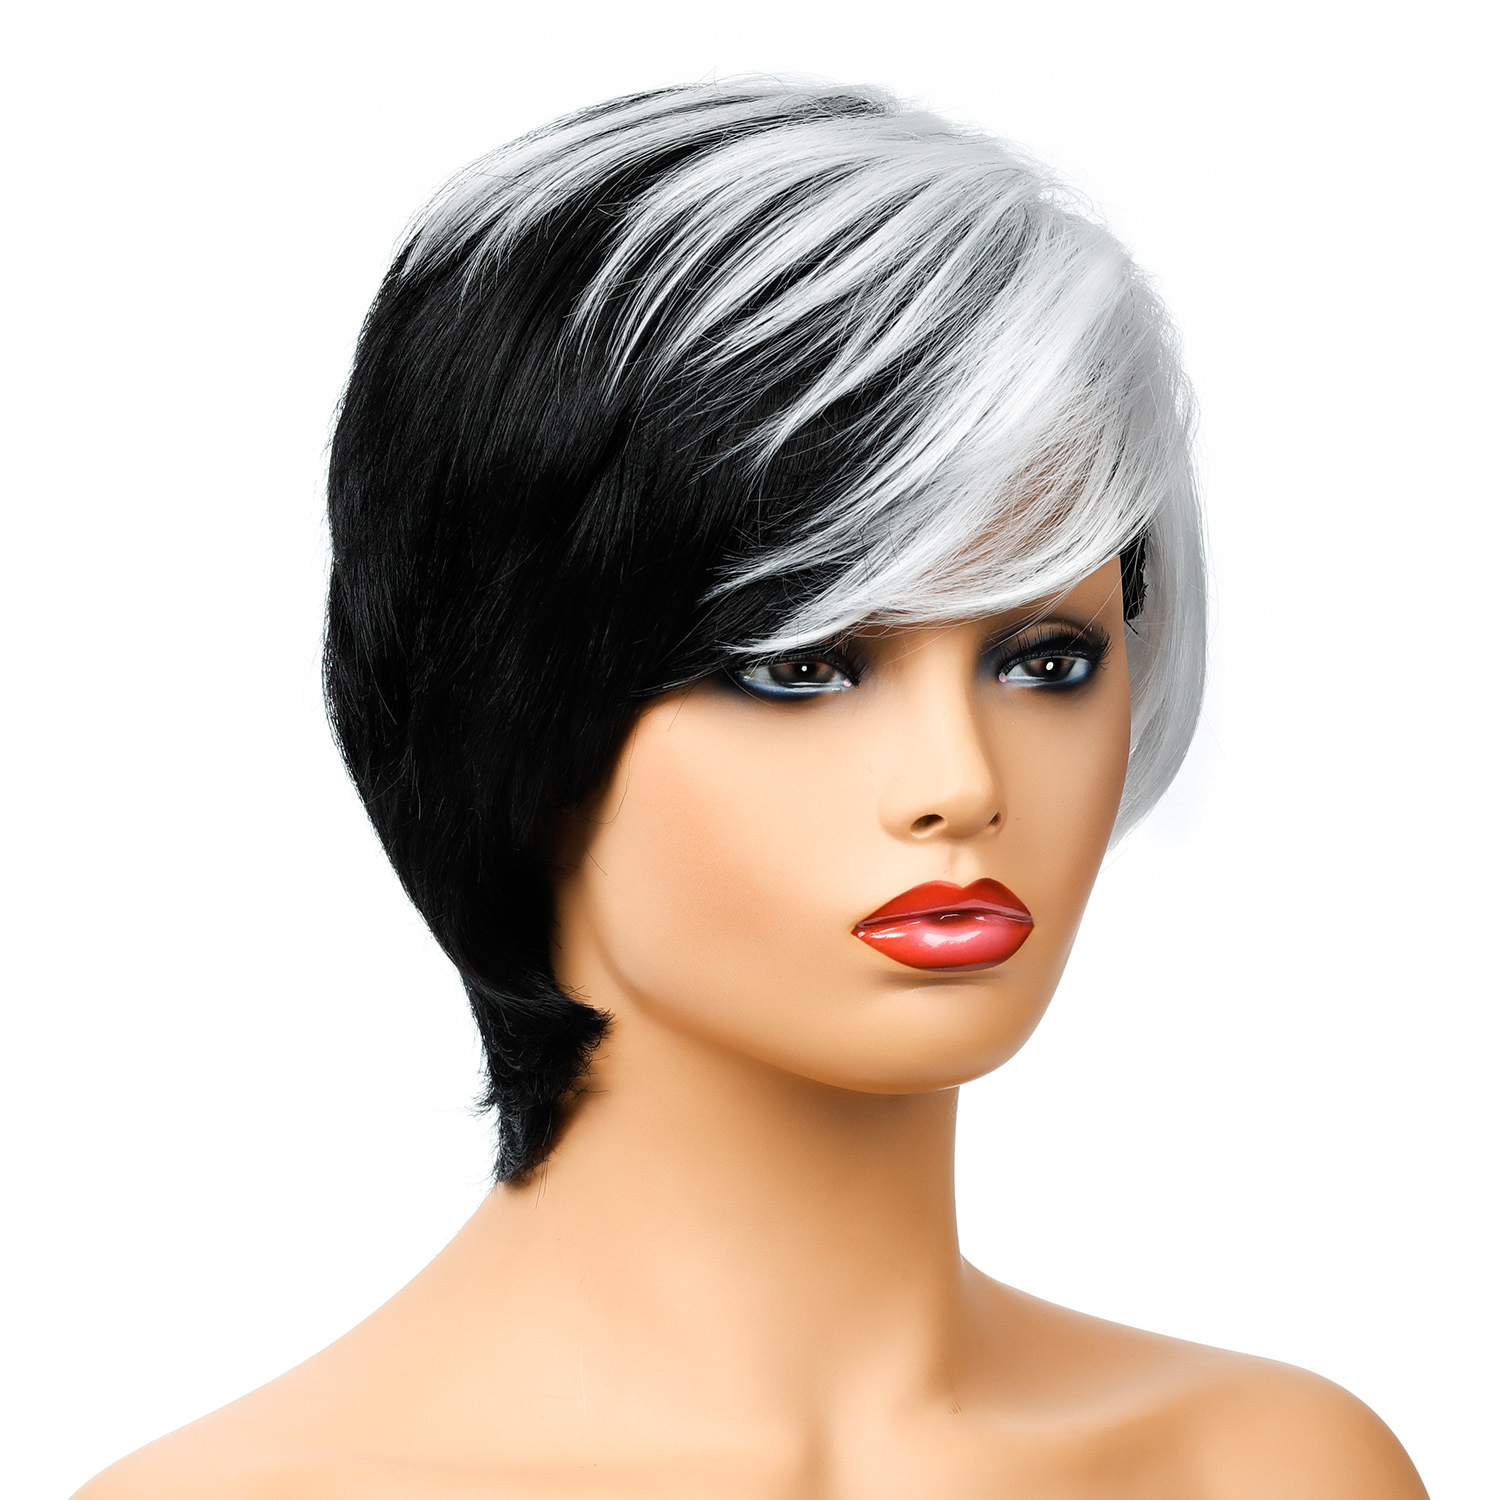  a trendy synthetic wig with black and white short hair, a fashionable choice for women